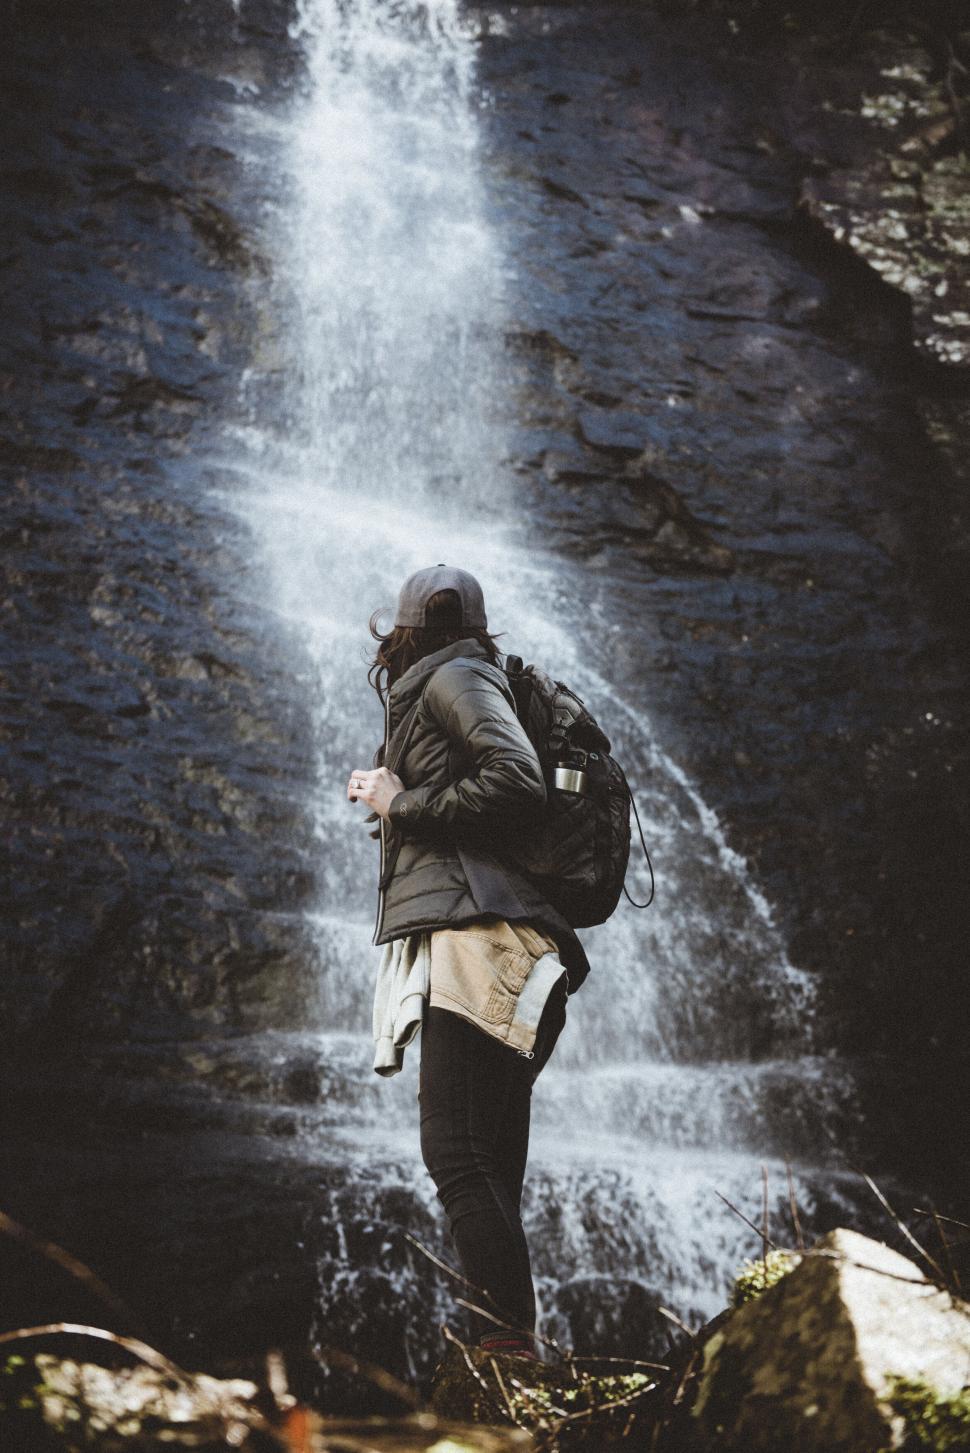 Free Image of Explorer in front of majestic waterfall 